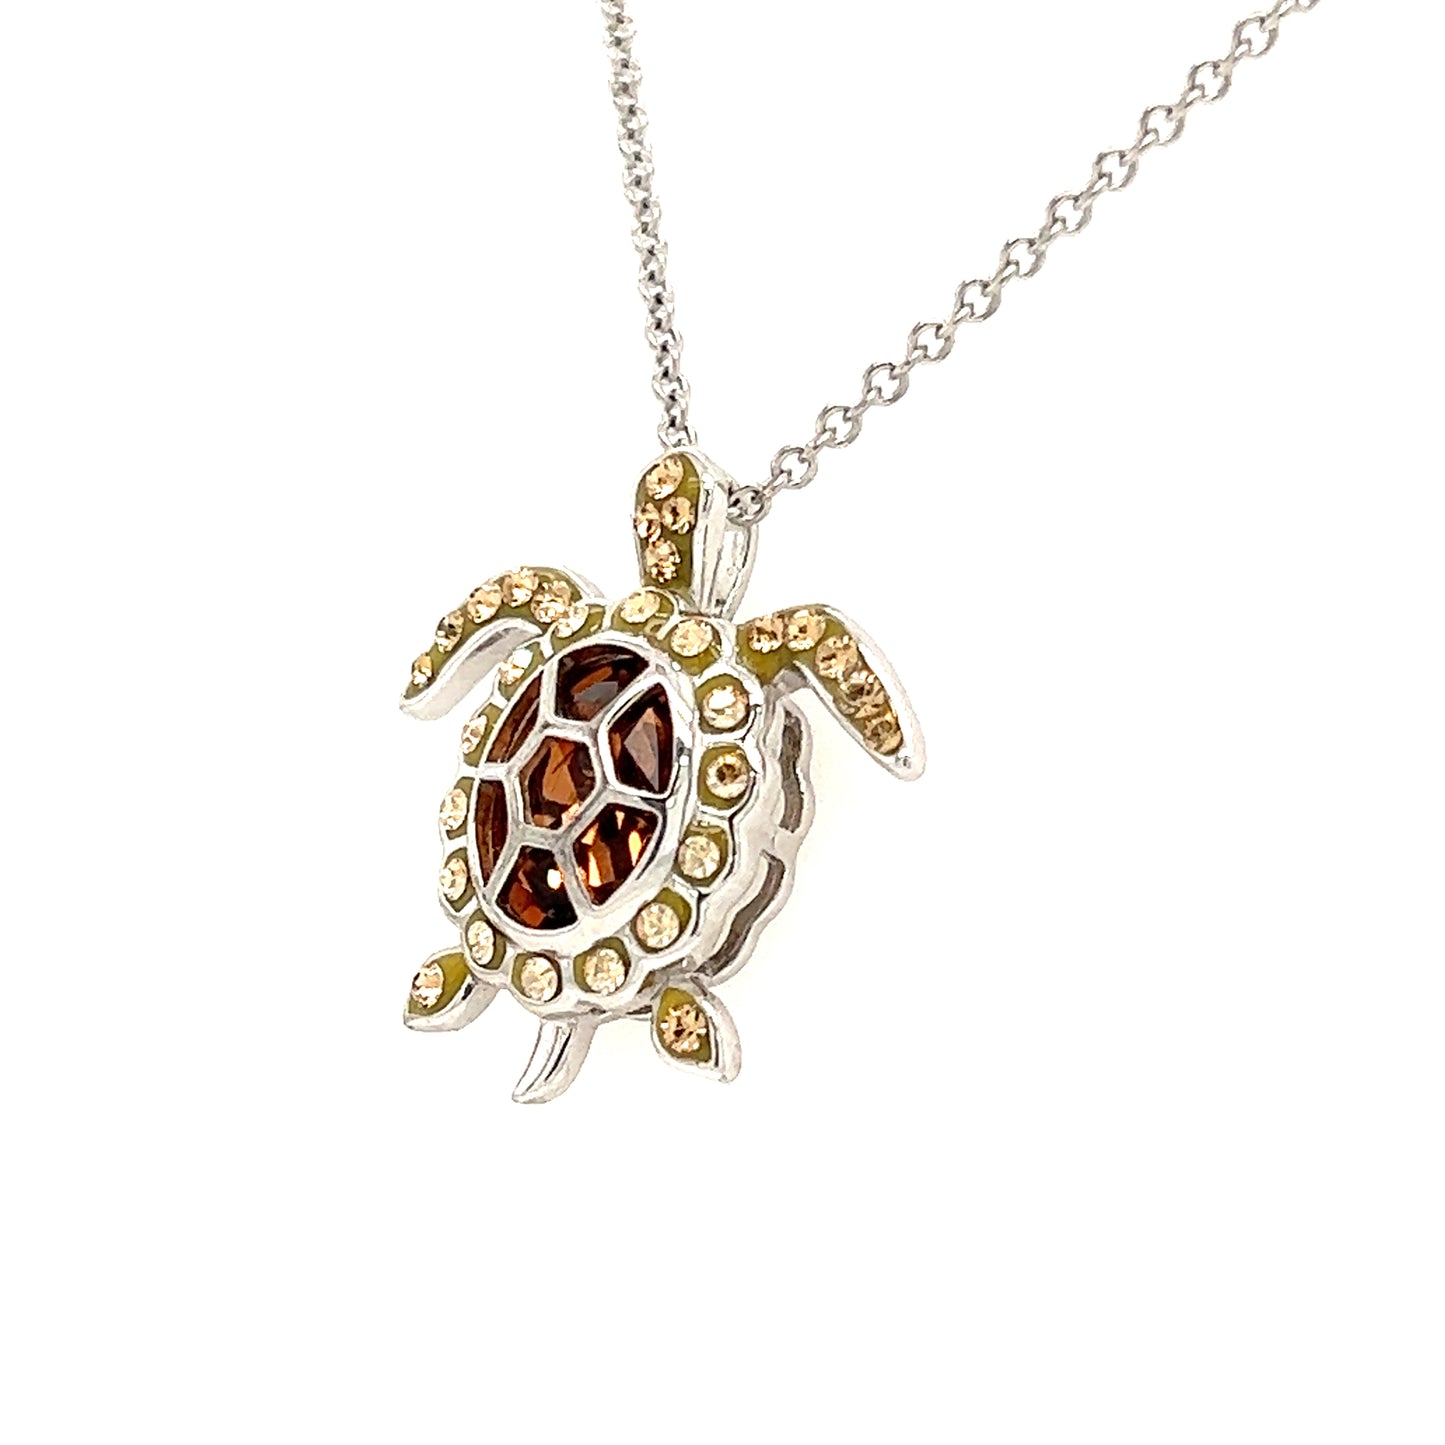 Sea Turtle Necklace with Yellow and White Crystals in Sterling Silver. Right Side View